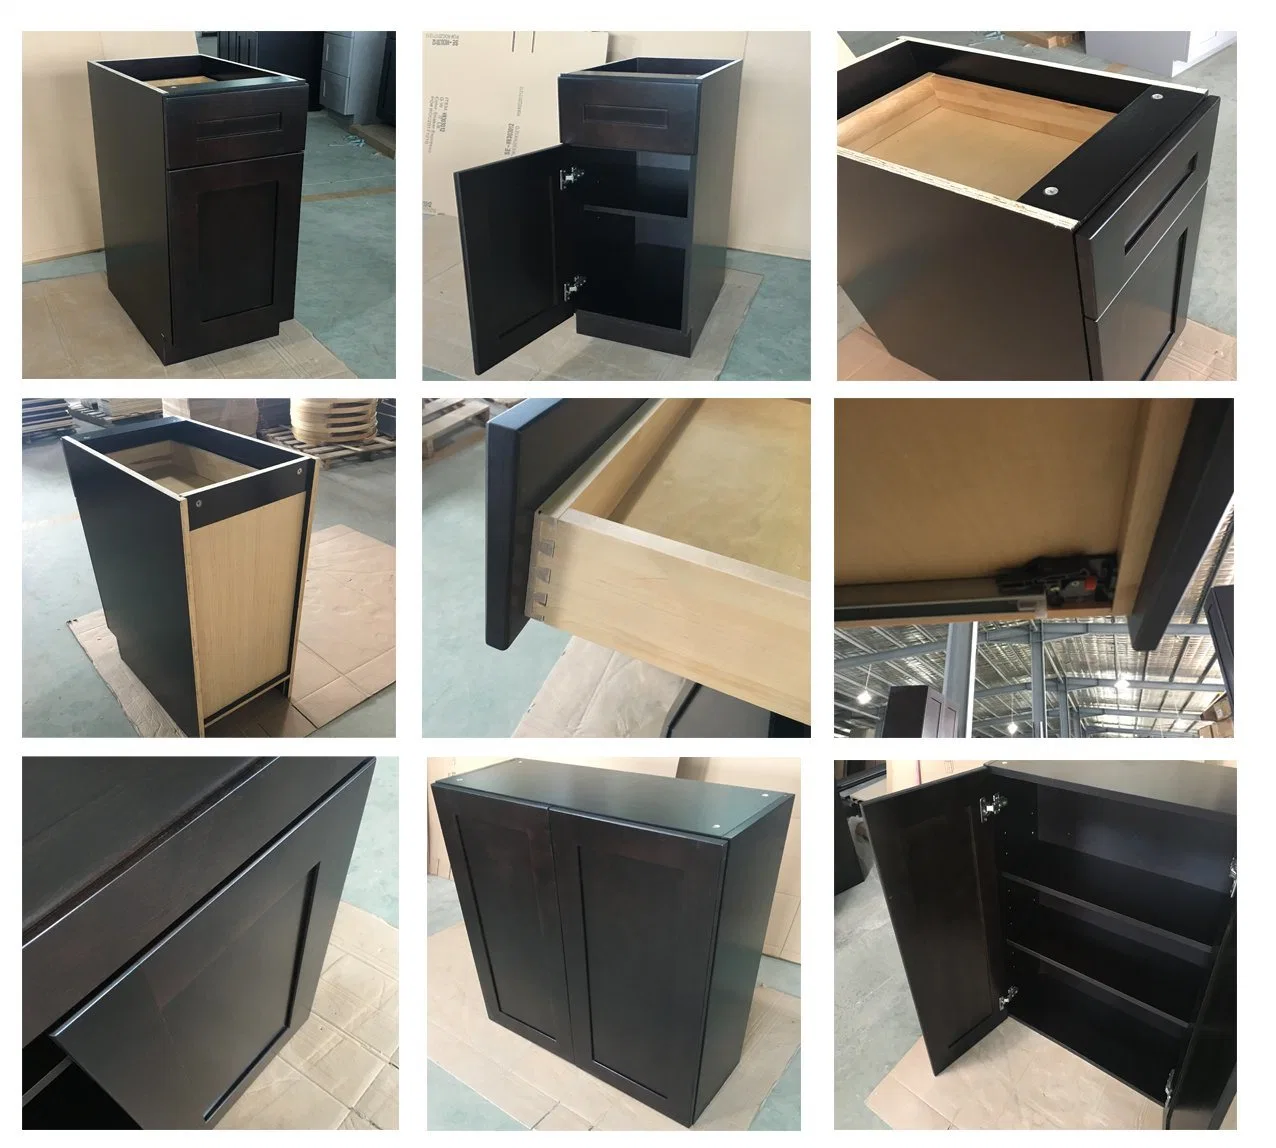 Cabinext Solid Wood Kd (Flat-Packed) Customized Fuzhou China Furniture Bathroom Cabinets